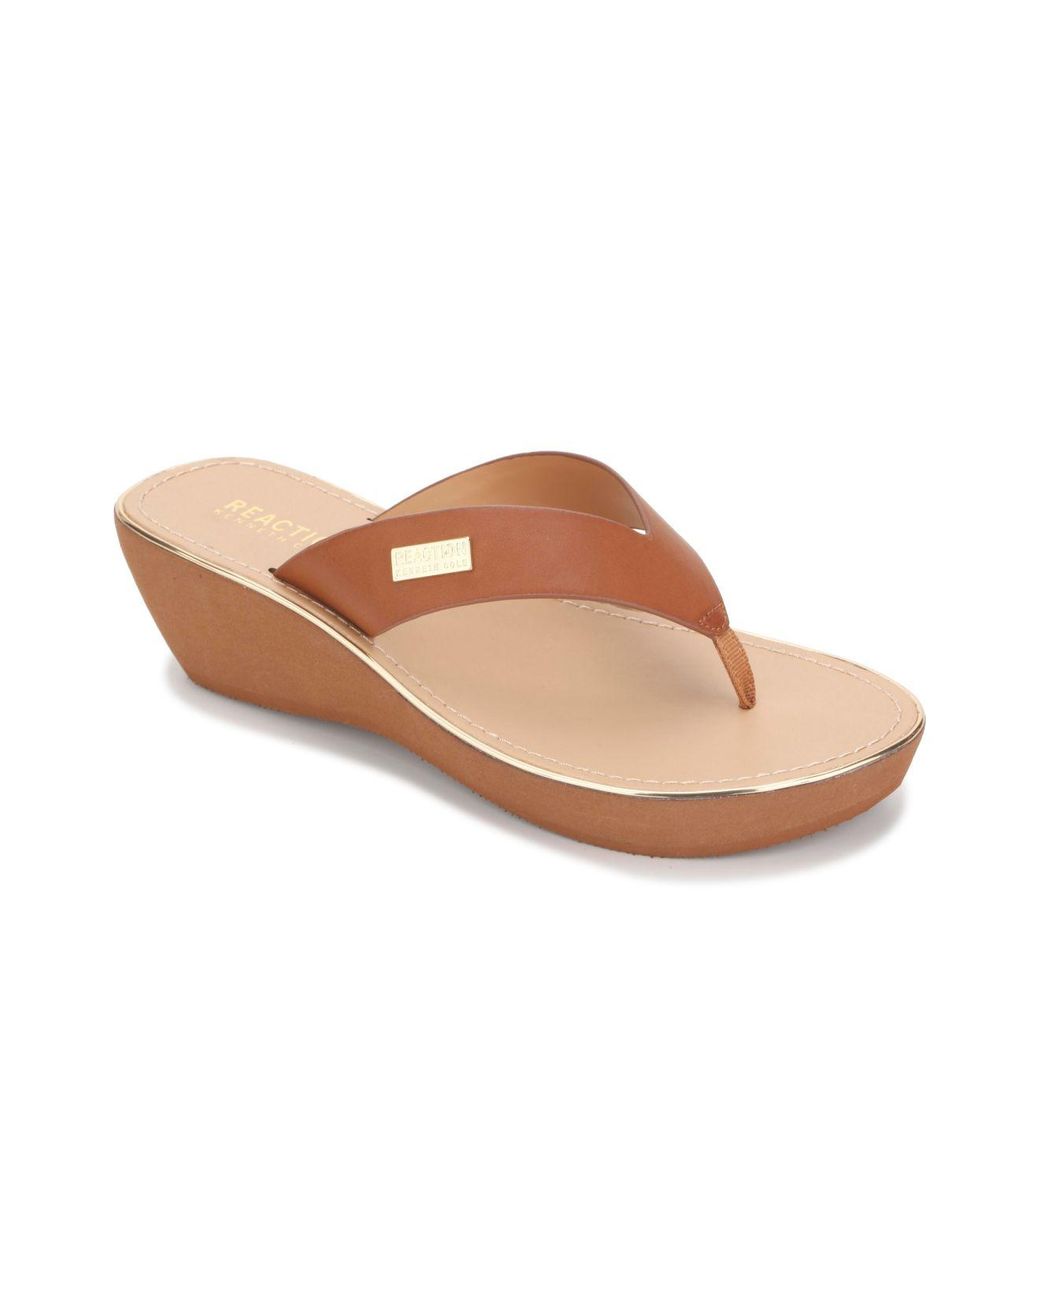 Kenneth Cole Reaction Shine Light Thong Sandals in Toffee (Brown) | Lyst